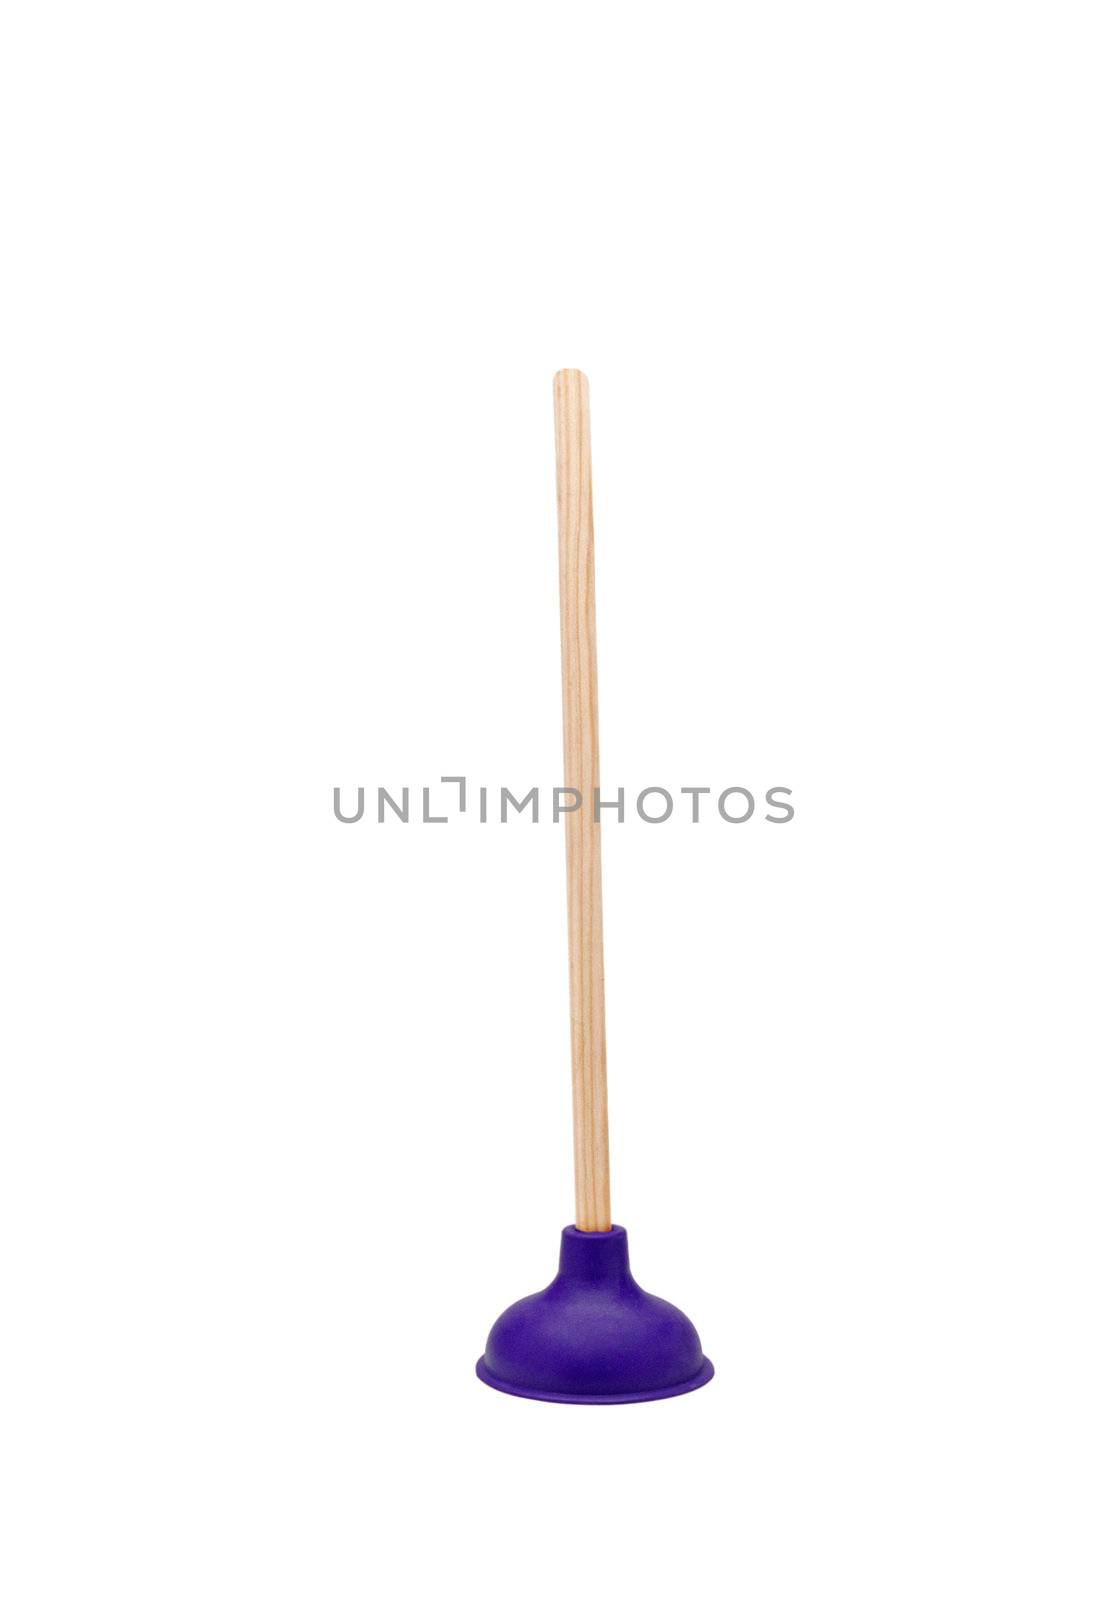 A plunger isolated on white